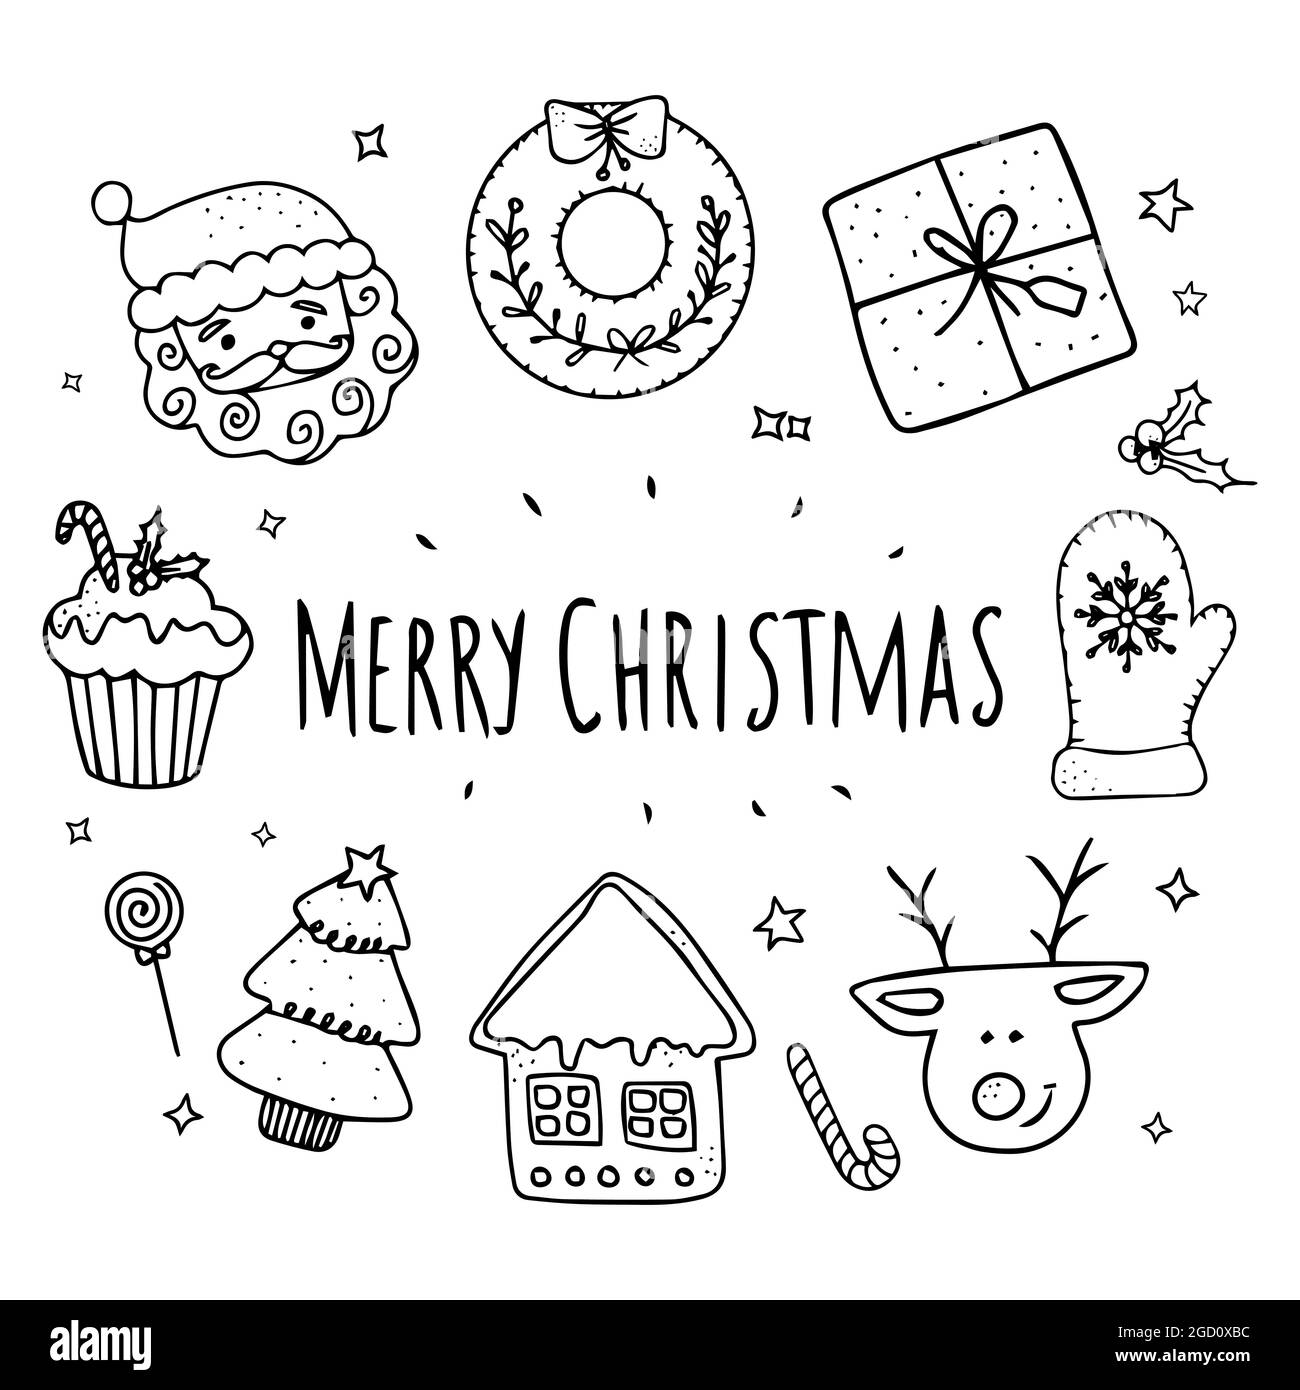 Set present boxes for gift tags, labels, card, invitations. Winter Christmas vector doodle. Hand drawn vector illustration. Christmas art drawings in Stock Vector